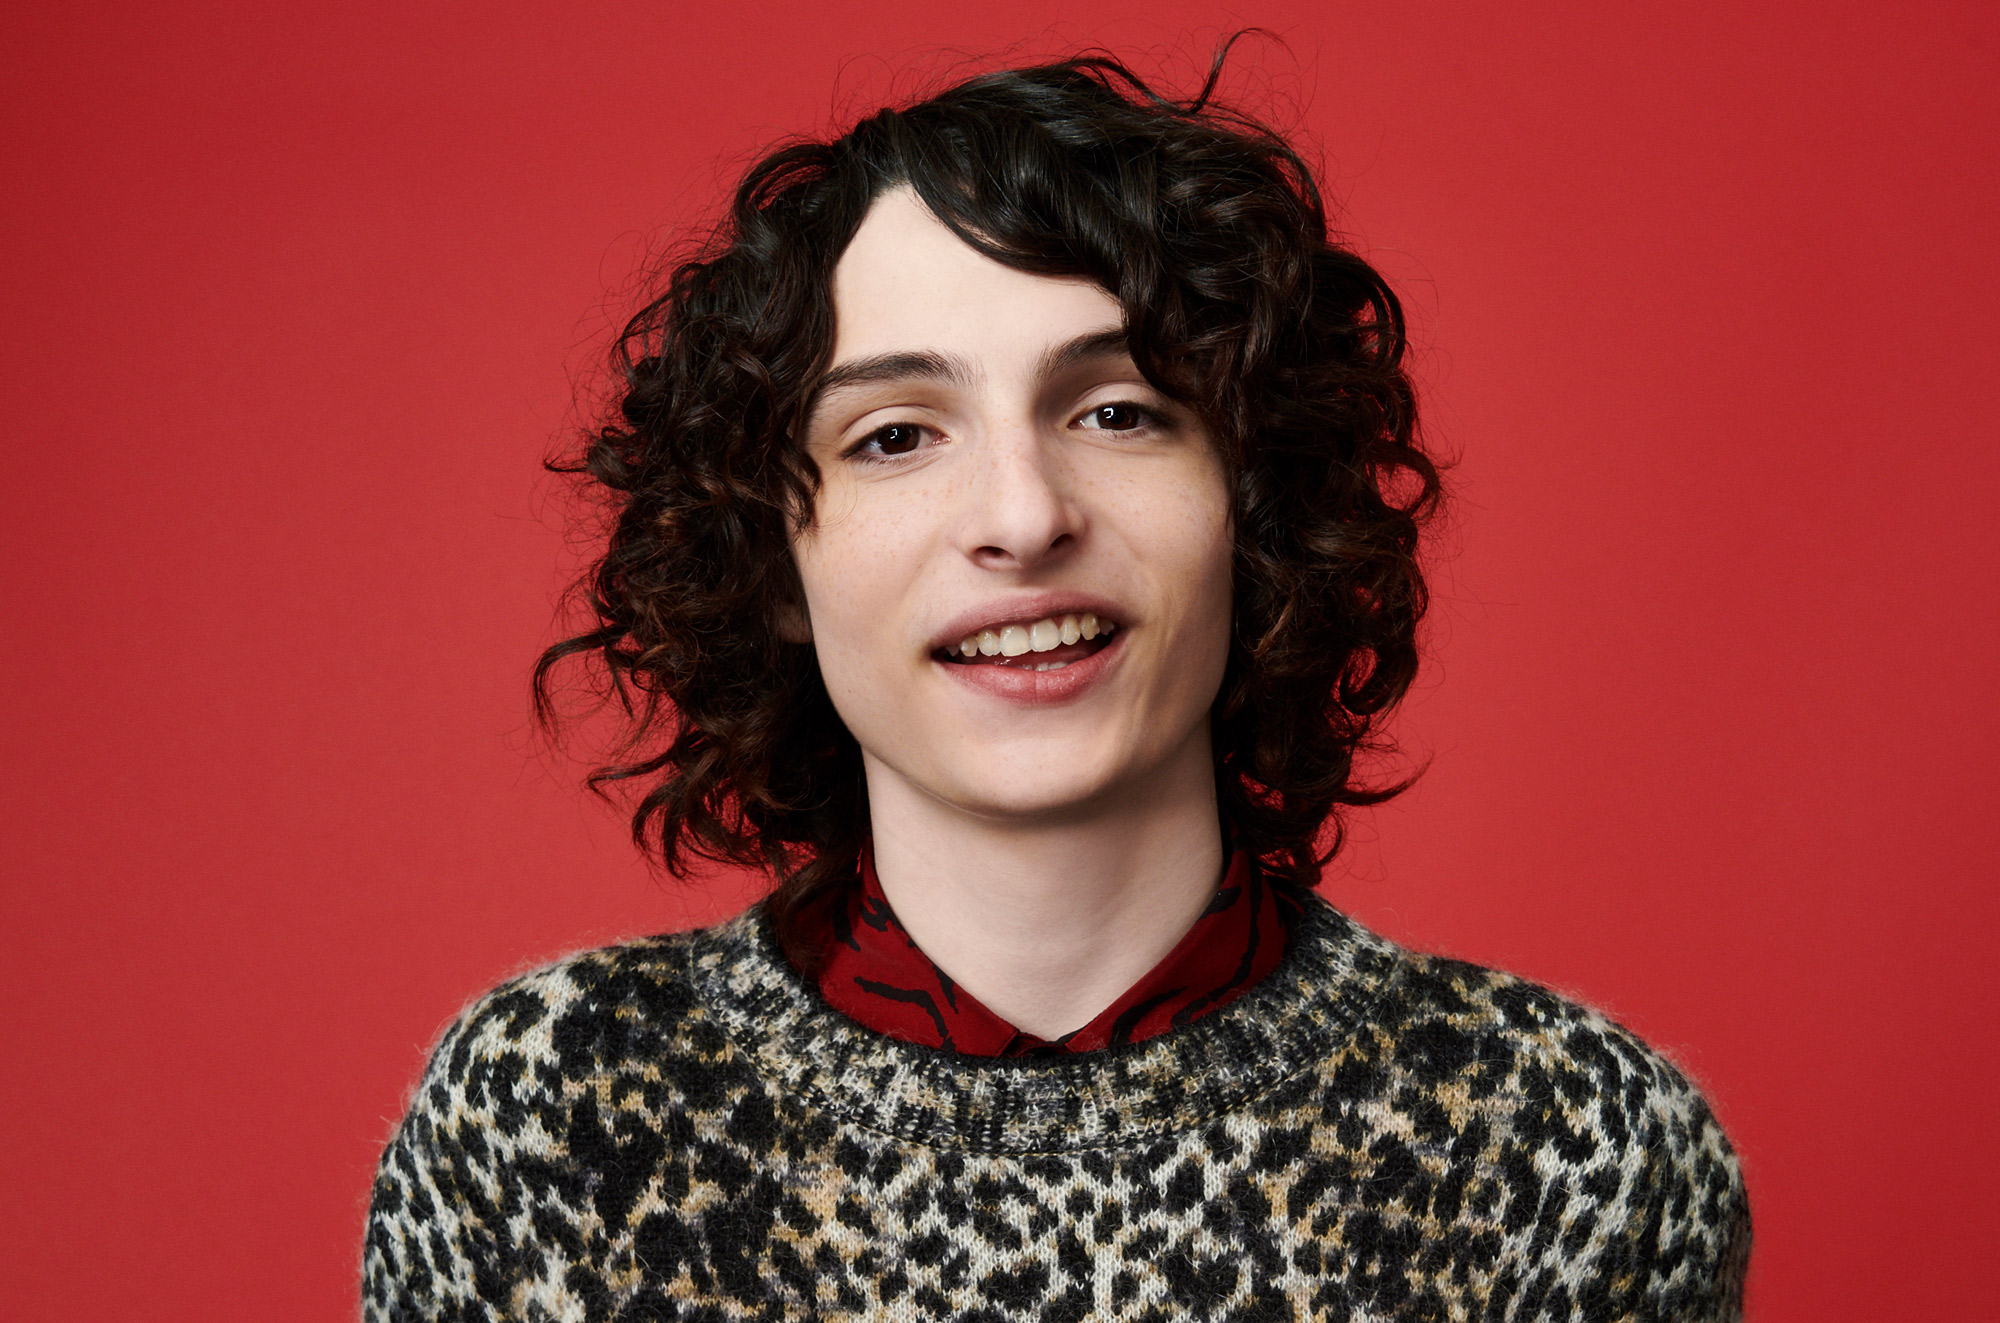 Stranger Things' Finn Wolfhard on What Makes 'Ghostbusters: Afterlife' New and Exciting